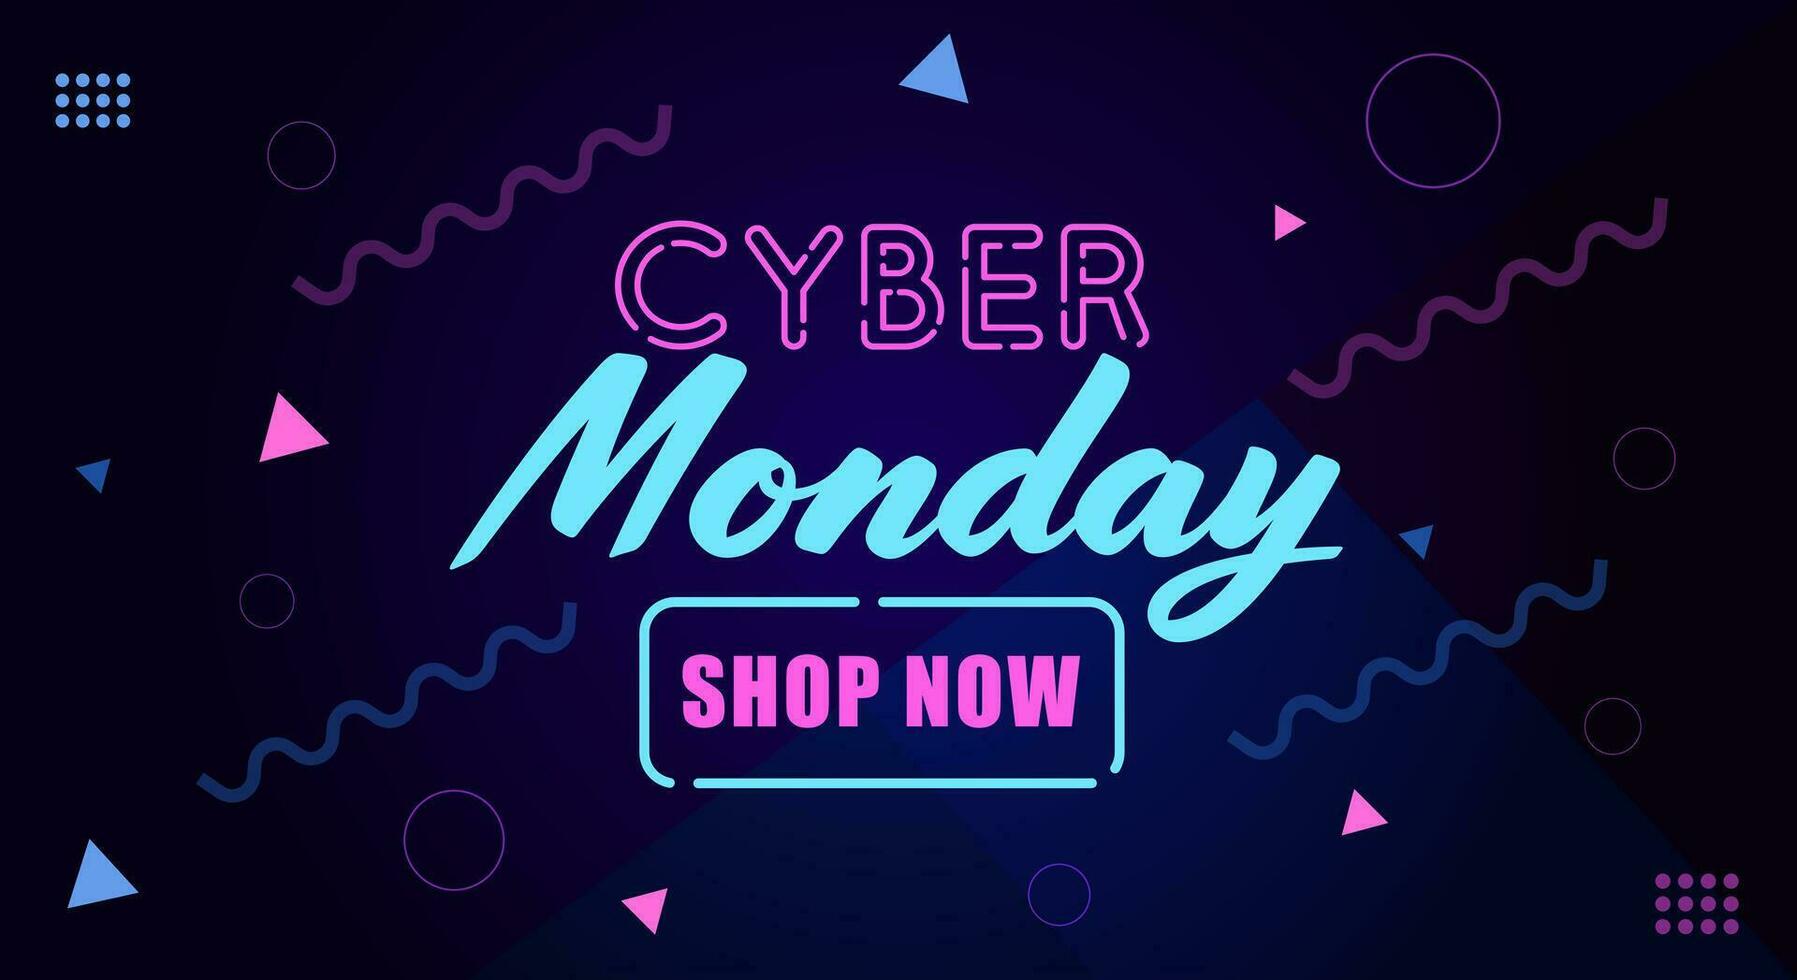 Cyber Monday Sale. Special offer vector design for promotion, poster, background, banner